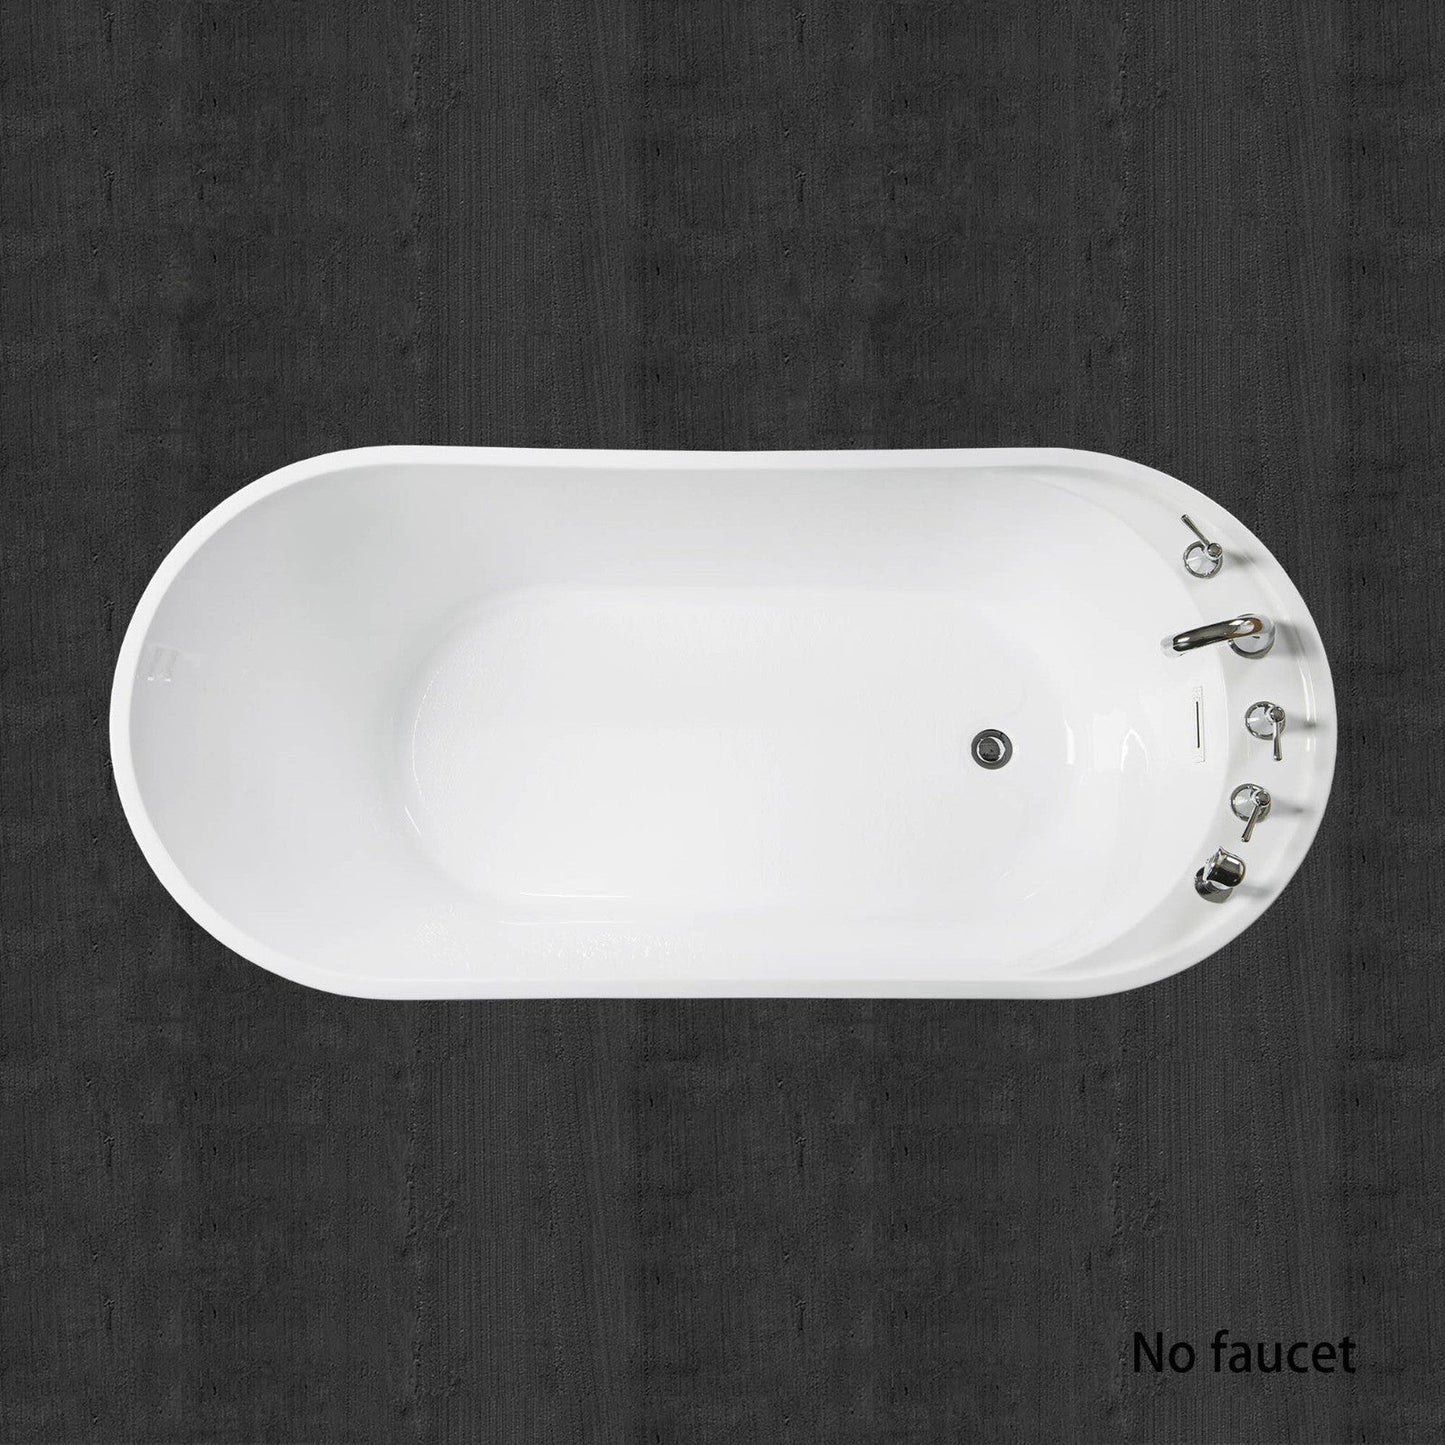 WoodBridge B0083 59" White Acrylic Freestanding Soaking Bathtub With Brushed Nickel Drain, Overflow, F0022 Tub Filler and Caddy Tray